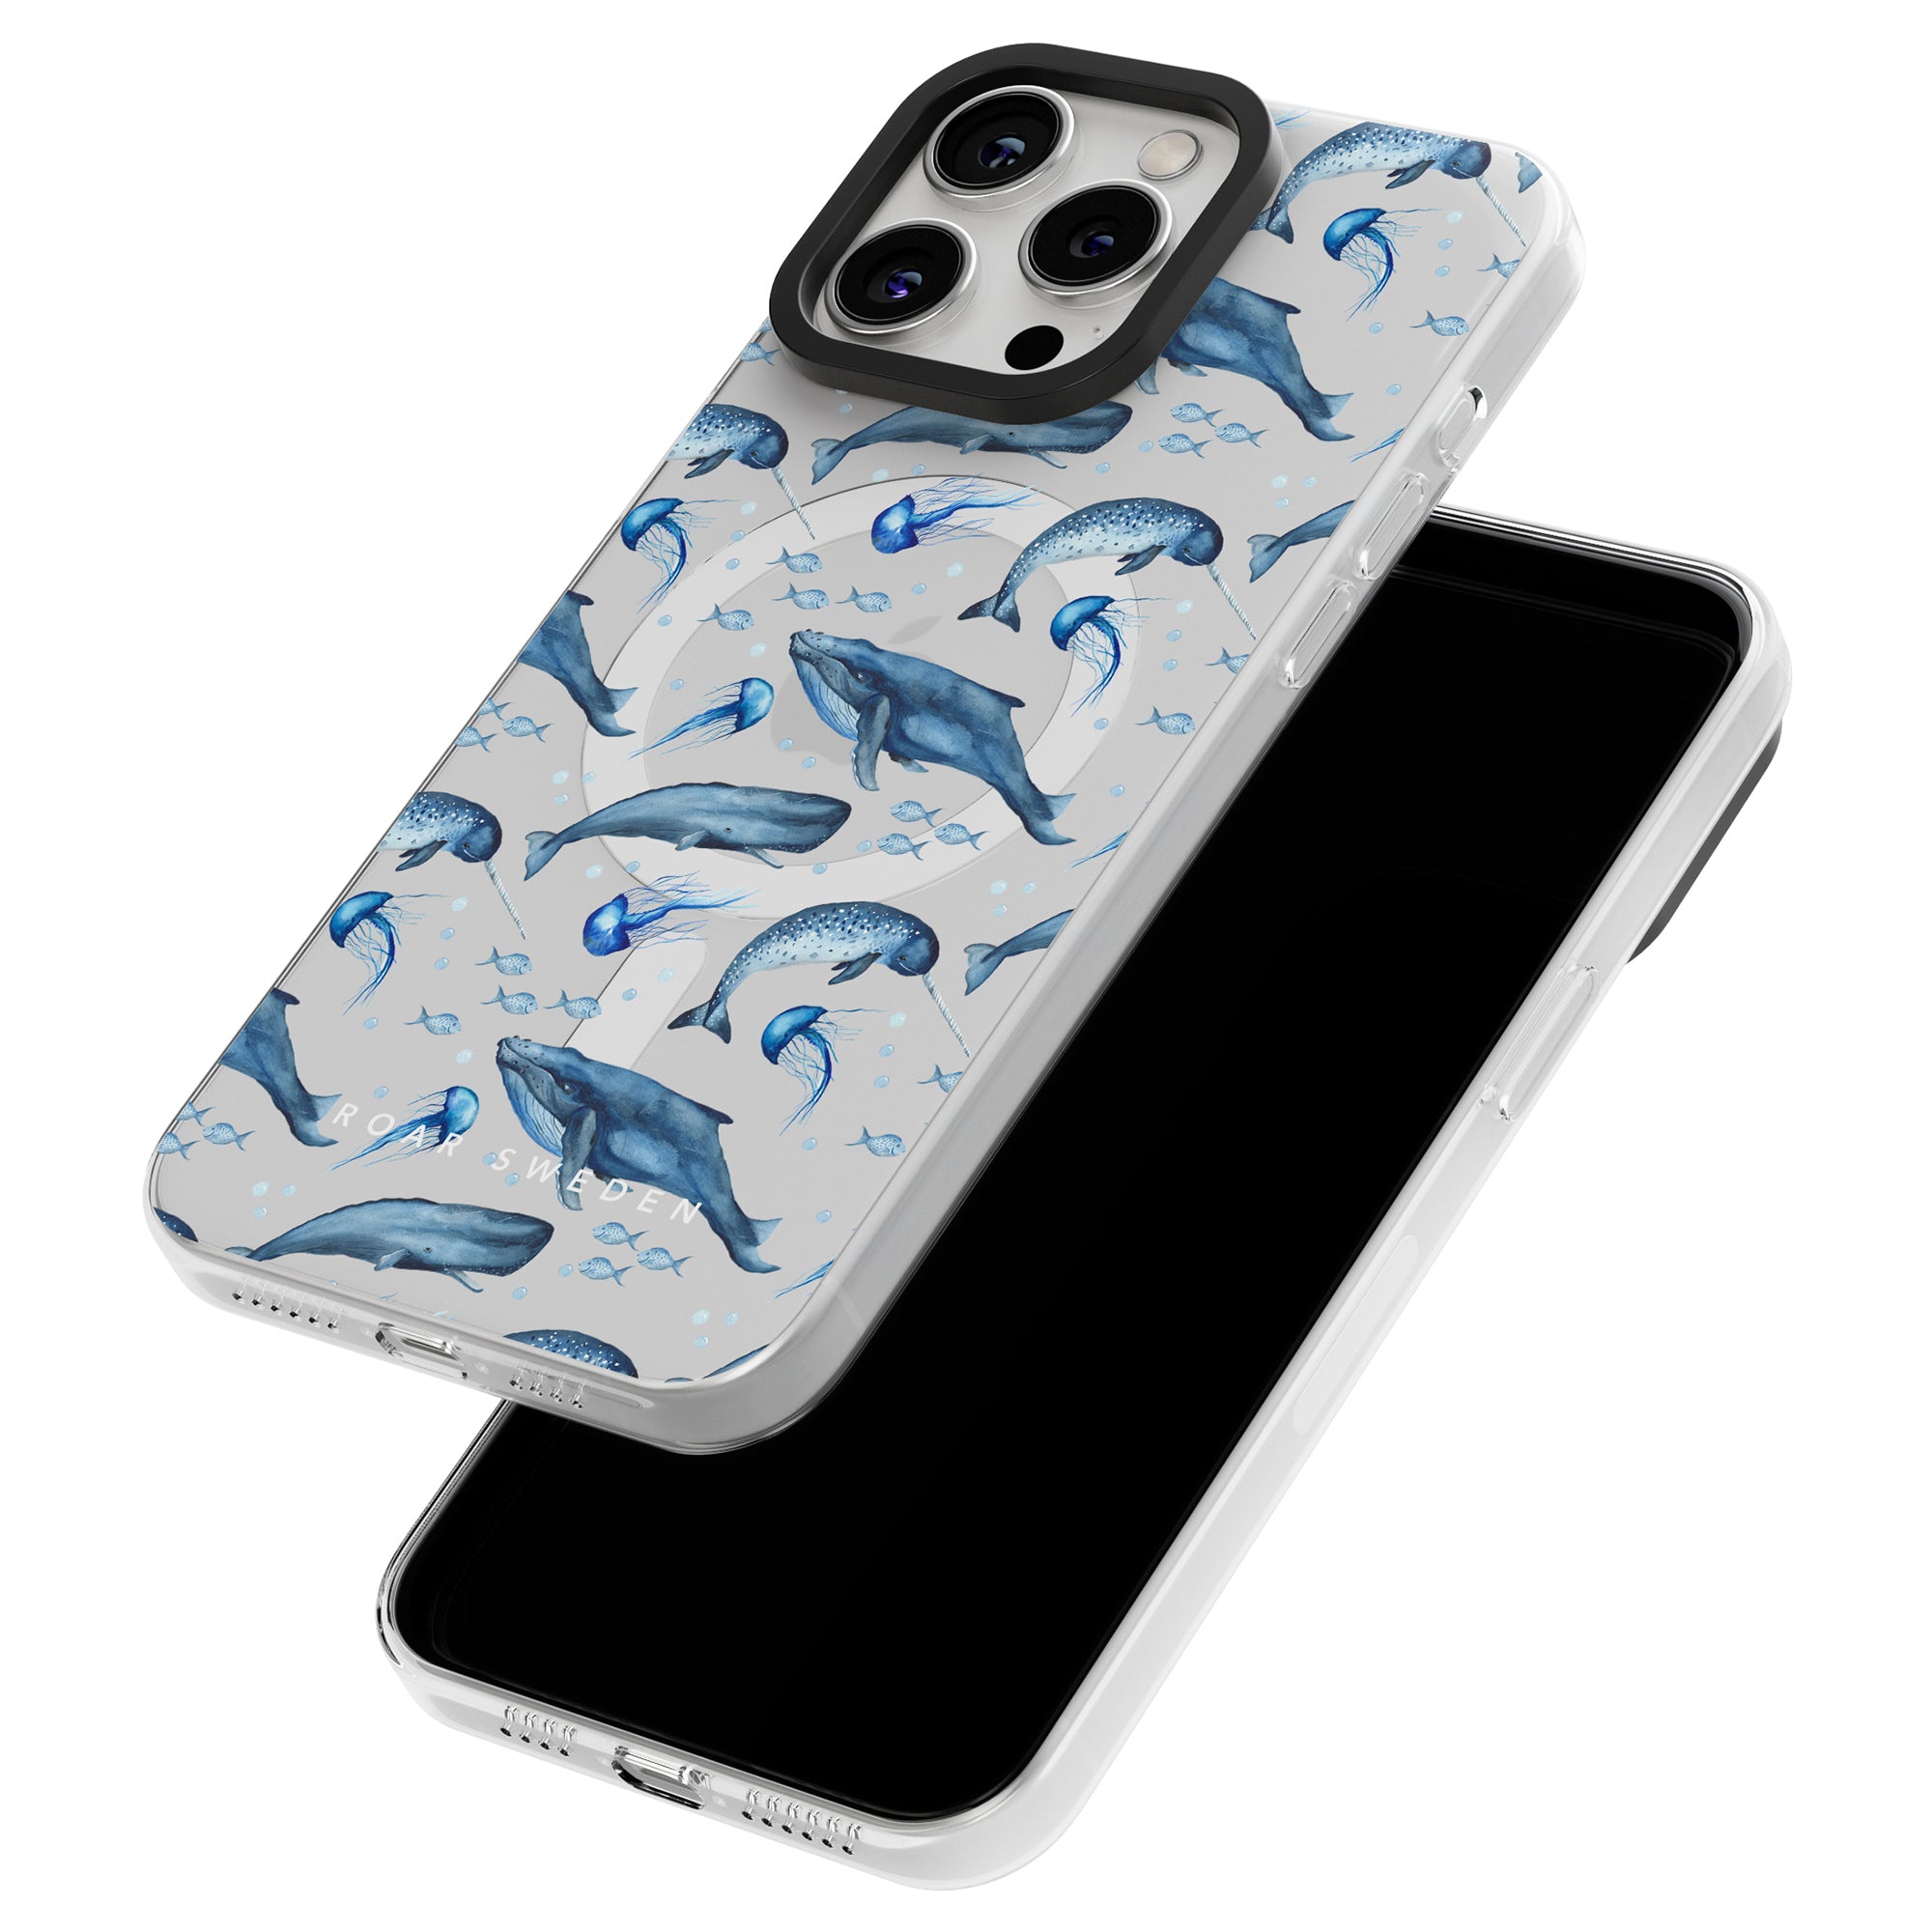 Two smartphone cases from the Ocean-kollektion feature a stunning whale pattern; one case is displayed standing, showcasing the back design, while the other lies flat, revealing the black screen area. These Cetacea - MagSafe Cases perfectly capture undervattensvärldens skönhet.